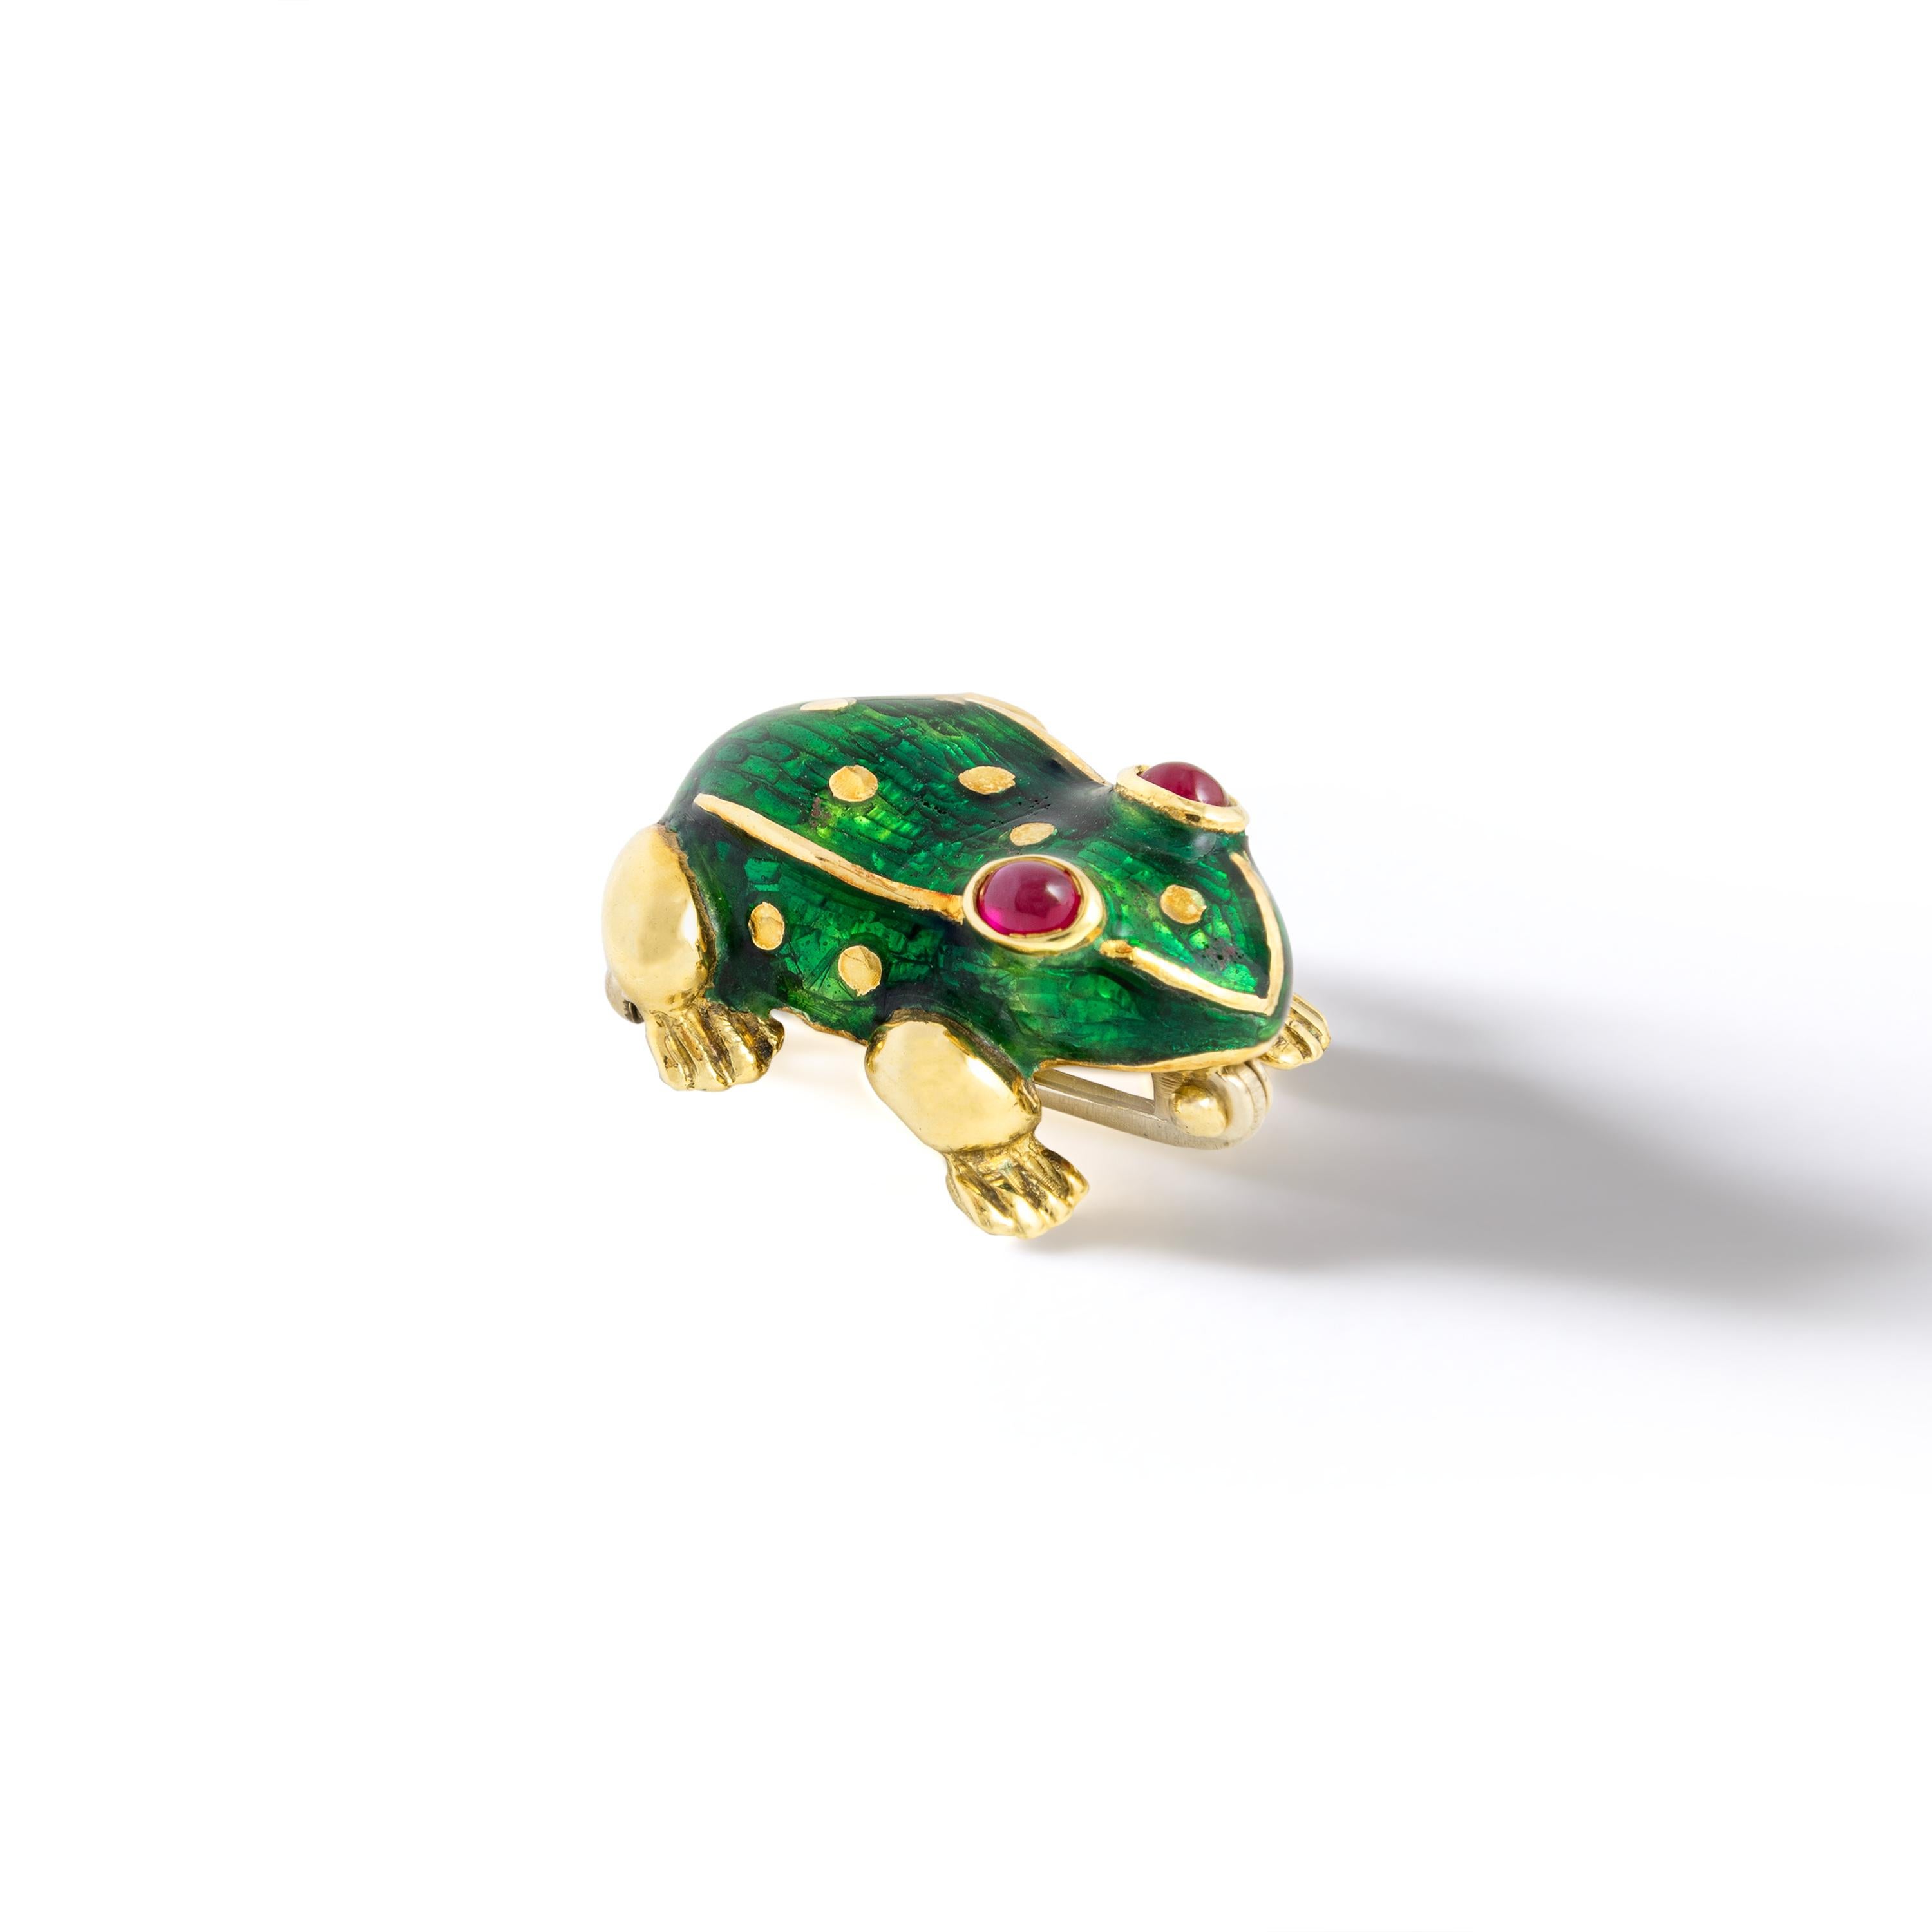 Frog yellow gold green enamel with ruby cabochon eyes Clip Brooch.
Chic and Elegant the perfect accessory on a jacket.

Total Length: 1.79 inch (2.00 centimeters).
Width at maximum: 1.71 inch (1.80 centimeters).
Total weight: 5.67 grams.